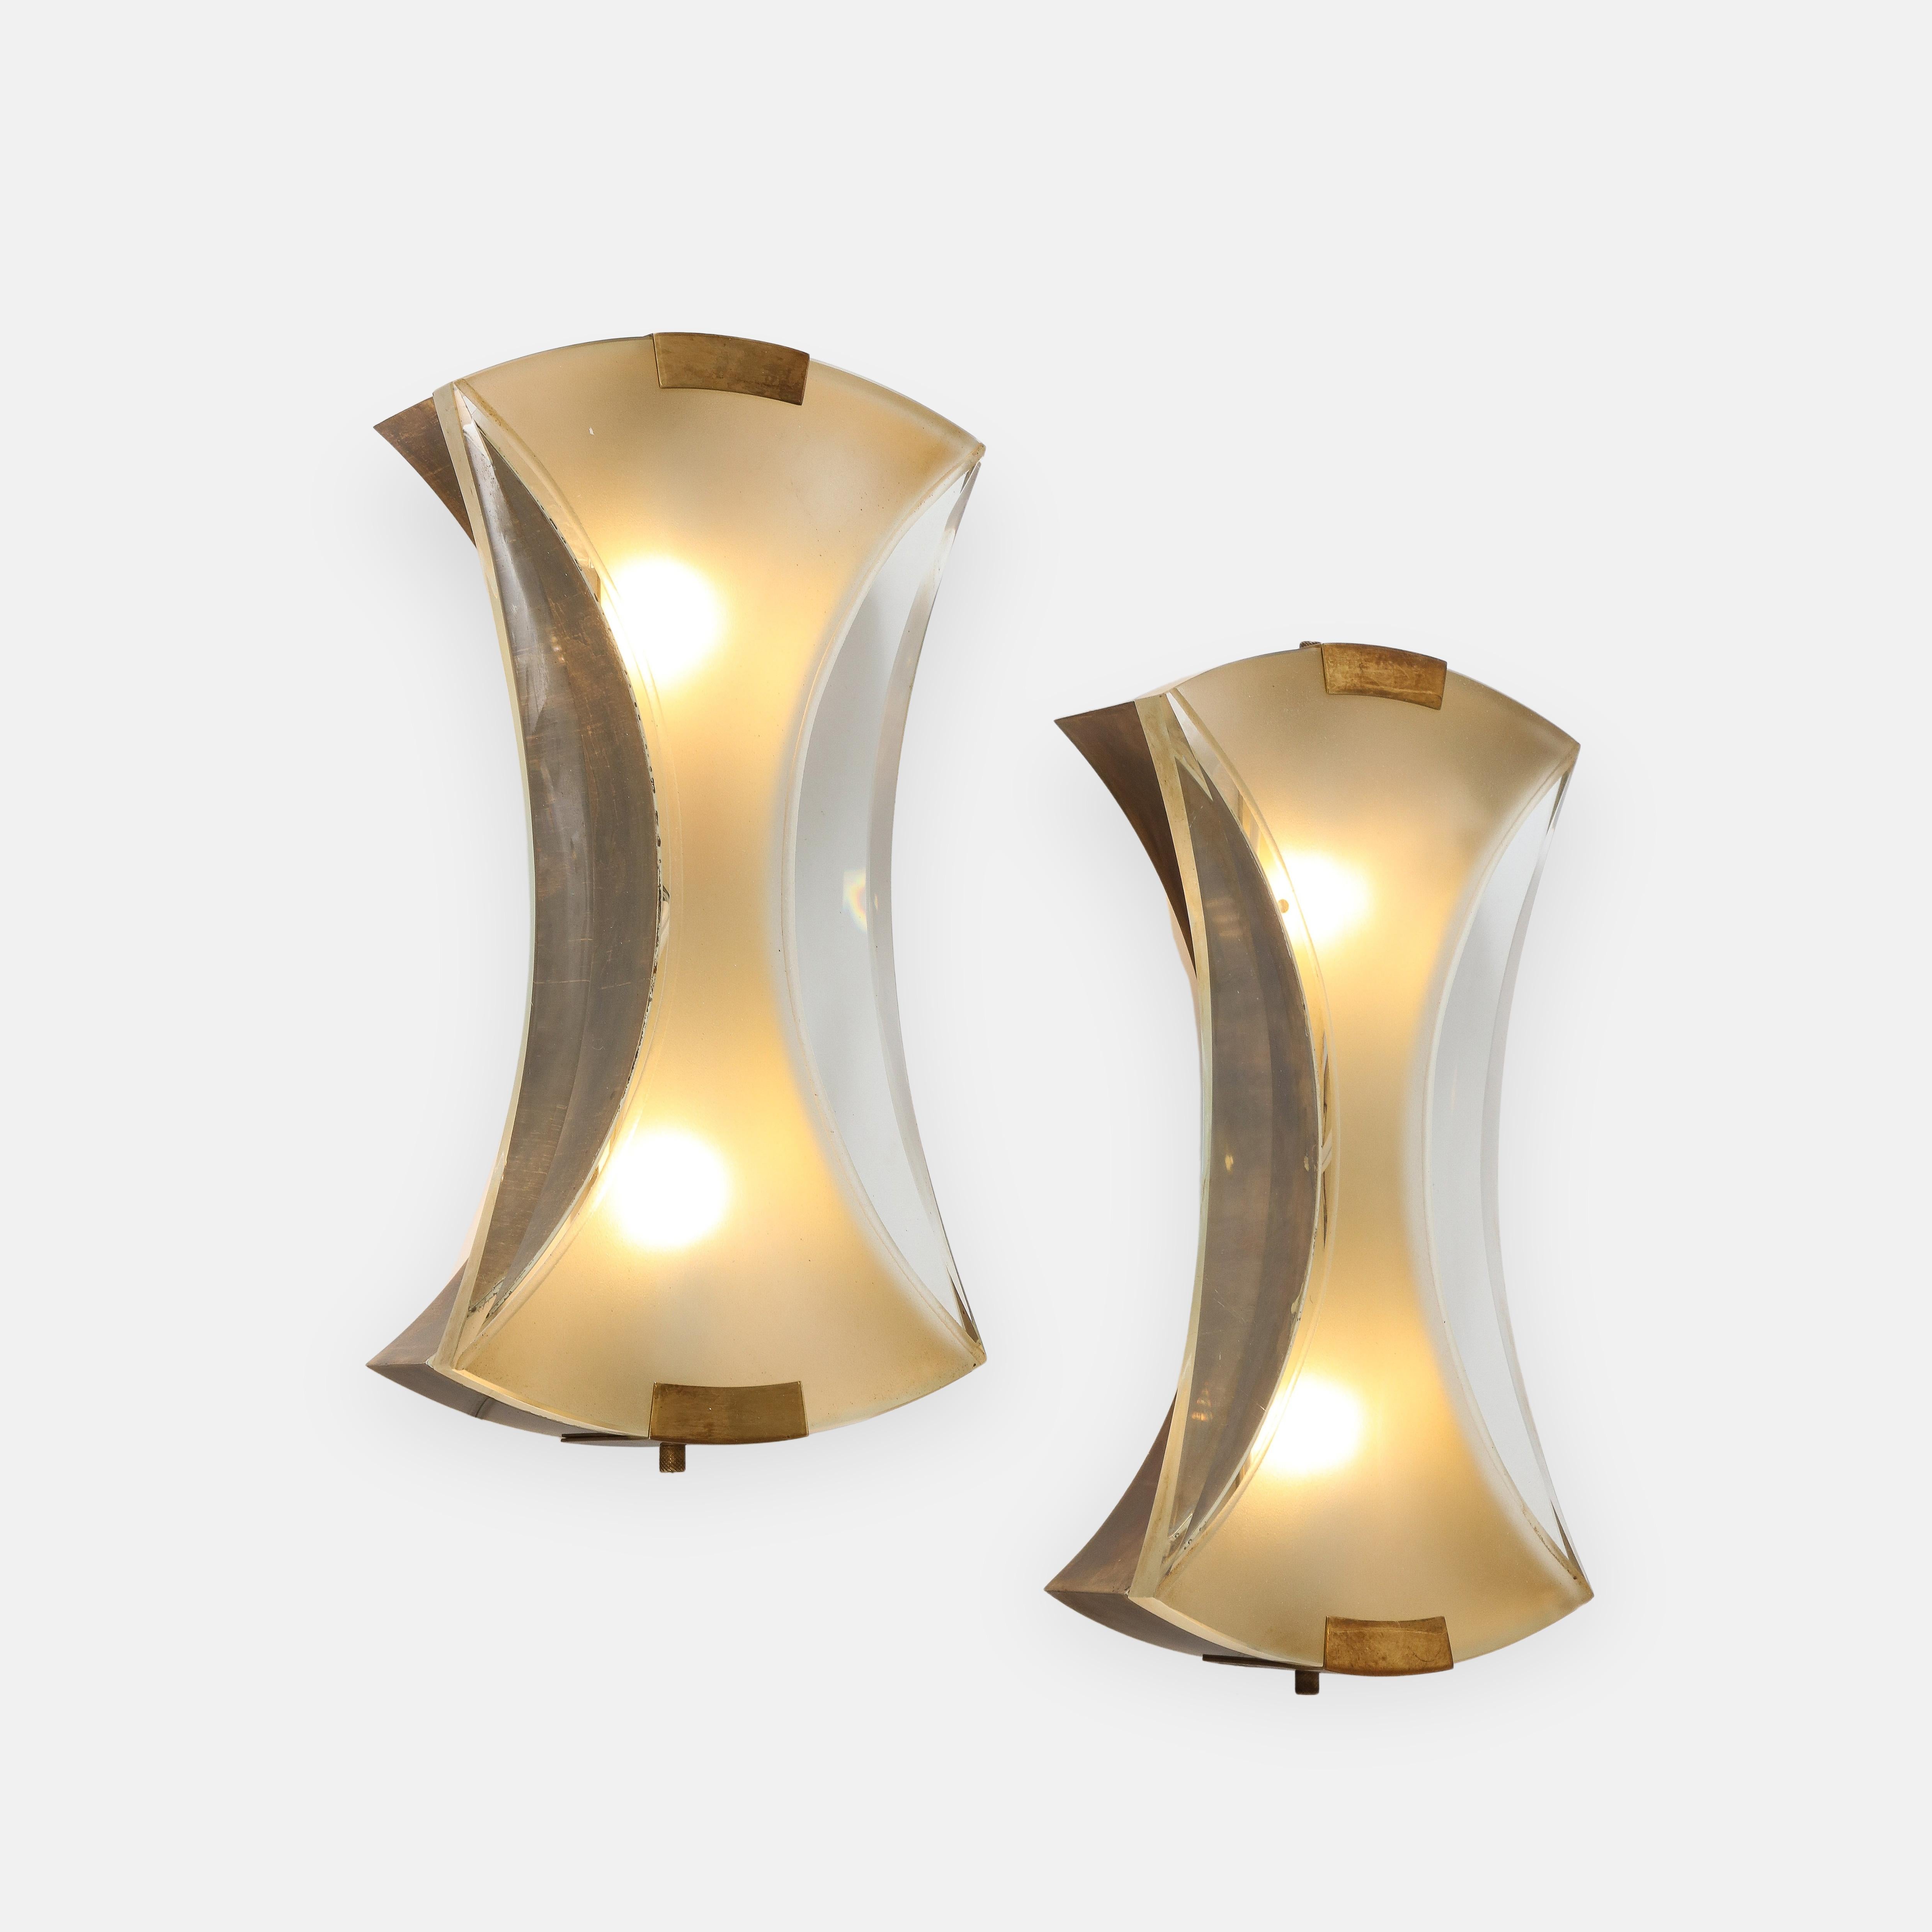 Max Ingrand for Fontana Arte rare pair of elegant modernist sconces model 2225 with central satin or acid-etched glass and outer clear polished glass suspended by brass fittings.
Recently rewired to U.S. standards.

Literature:
Franco Deboni,